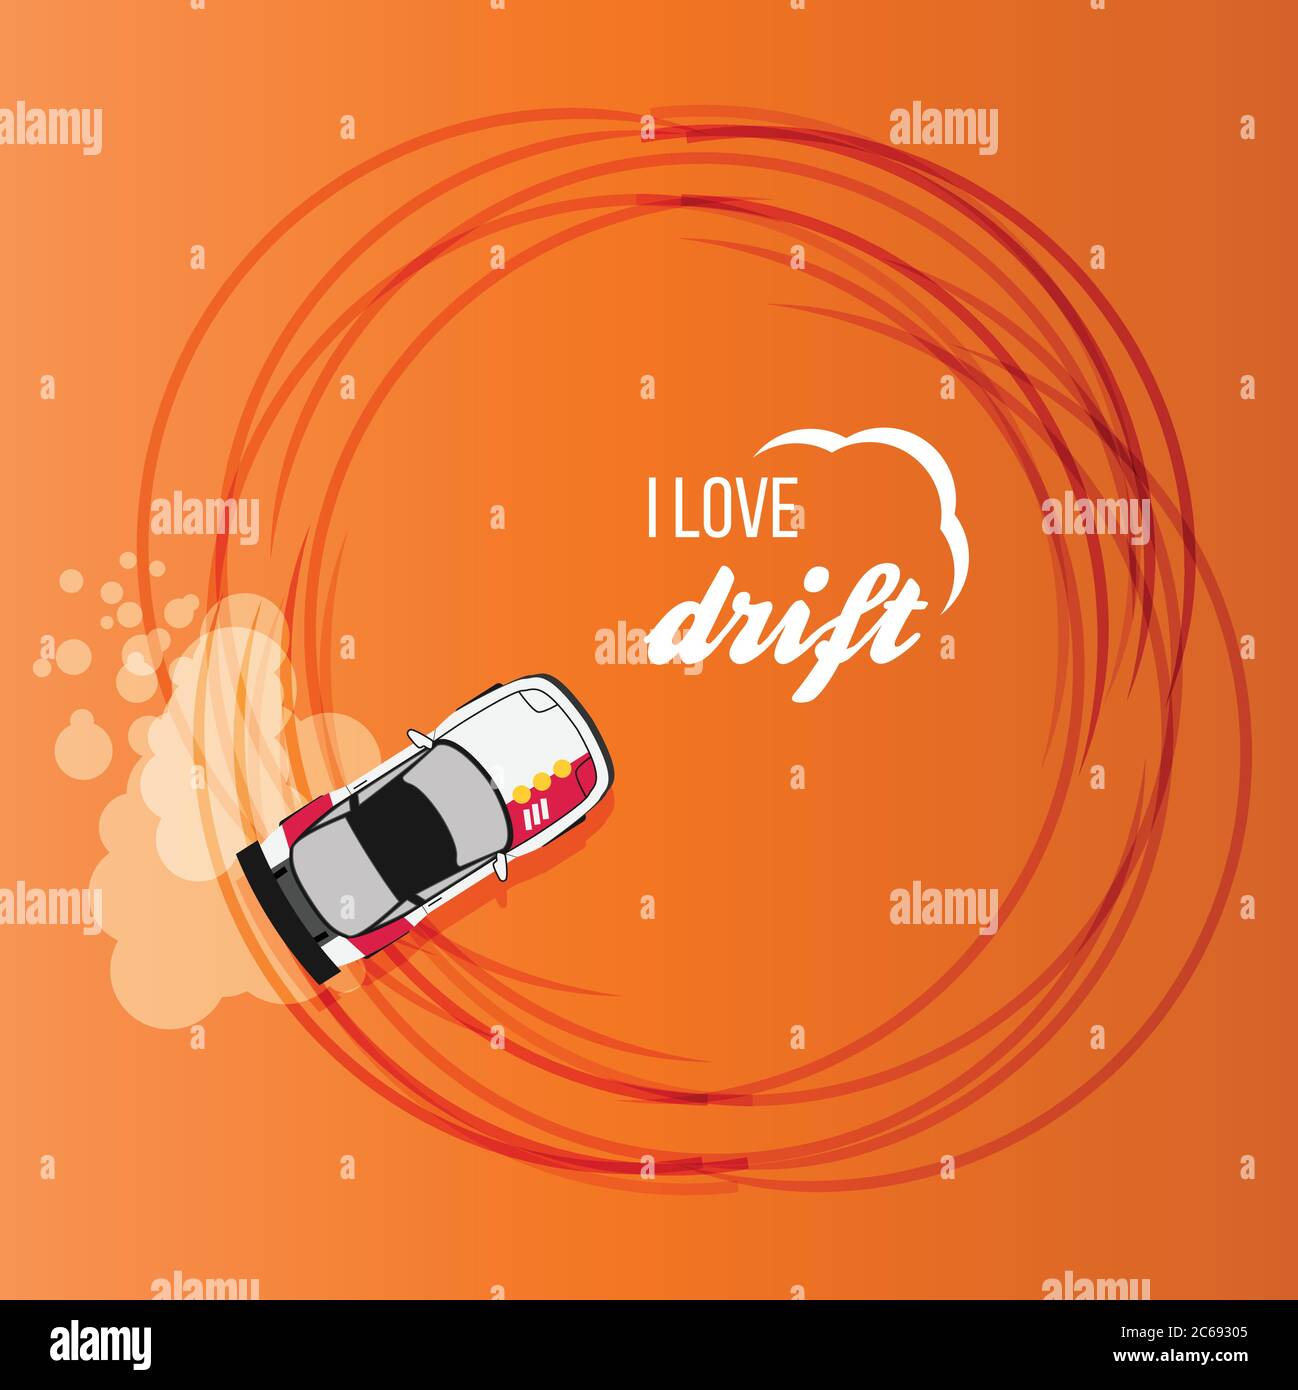 Top view of a drifting car Stock Vector